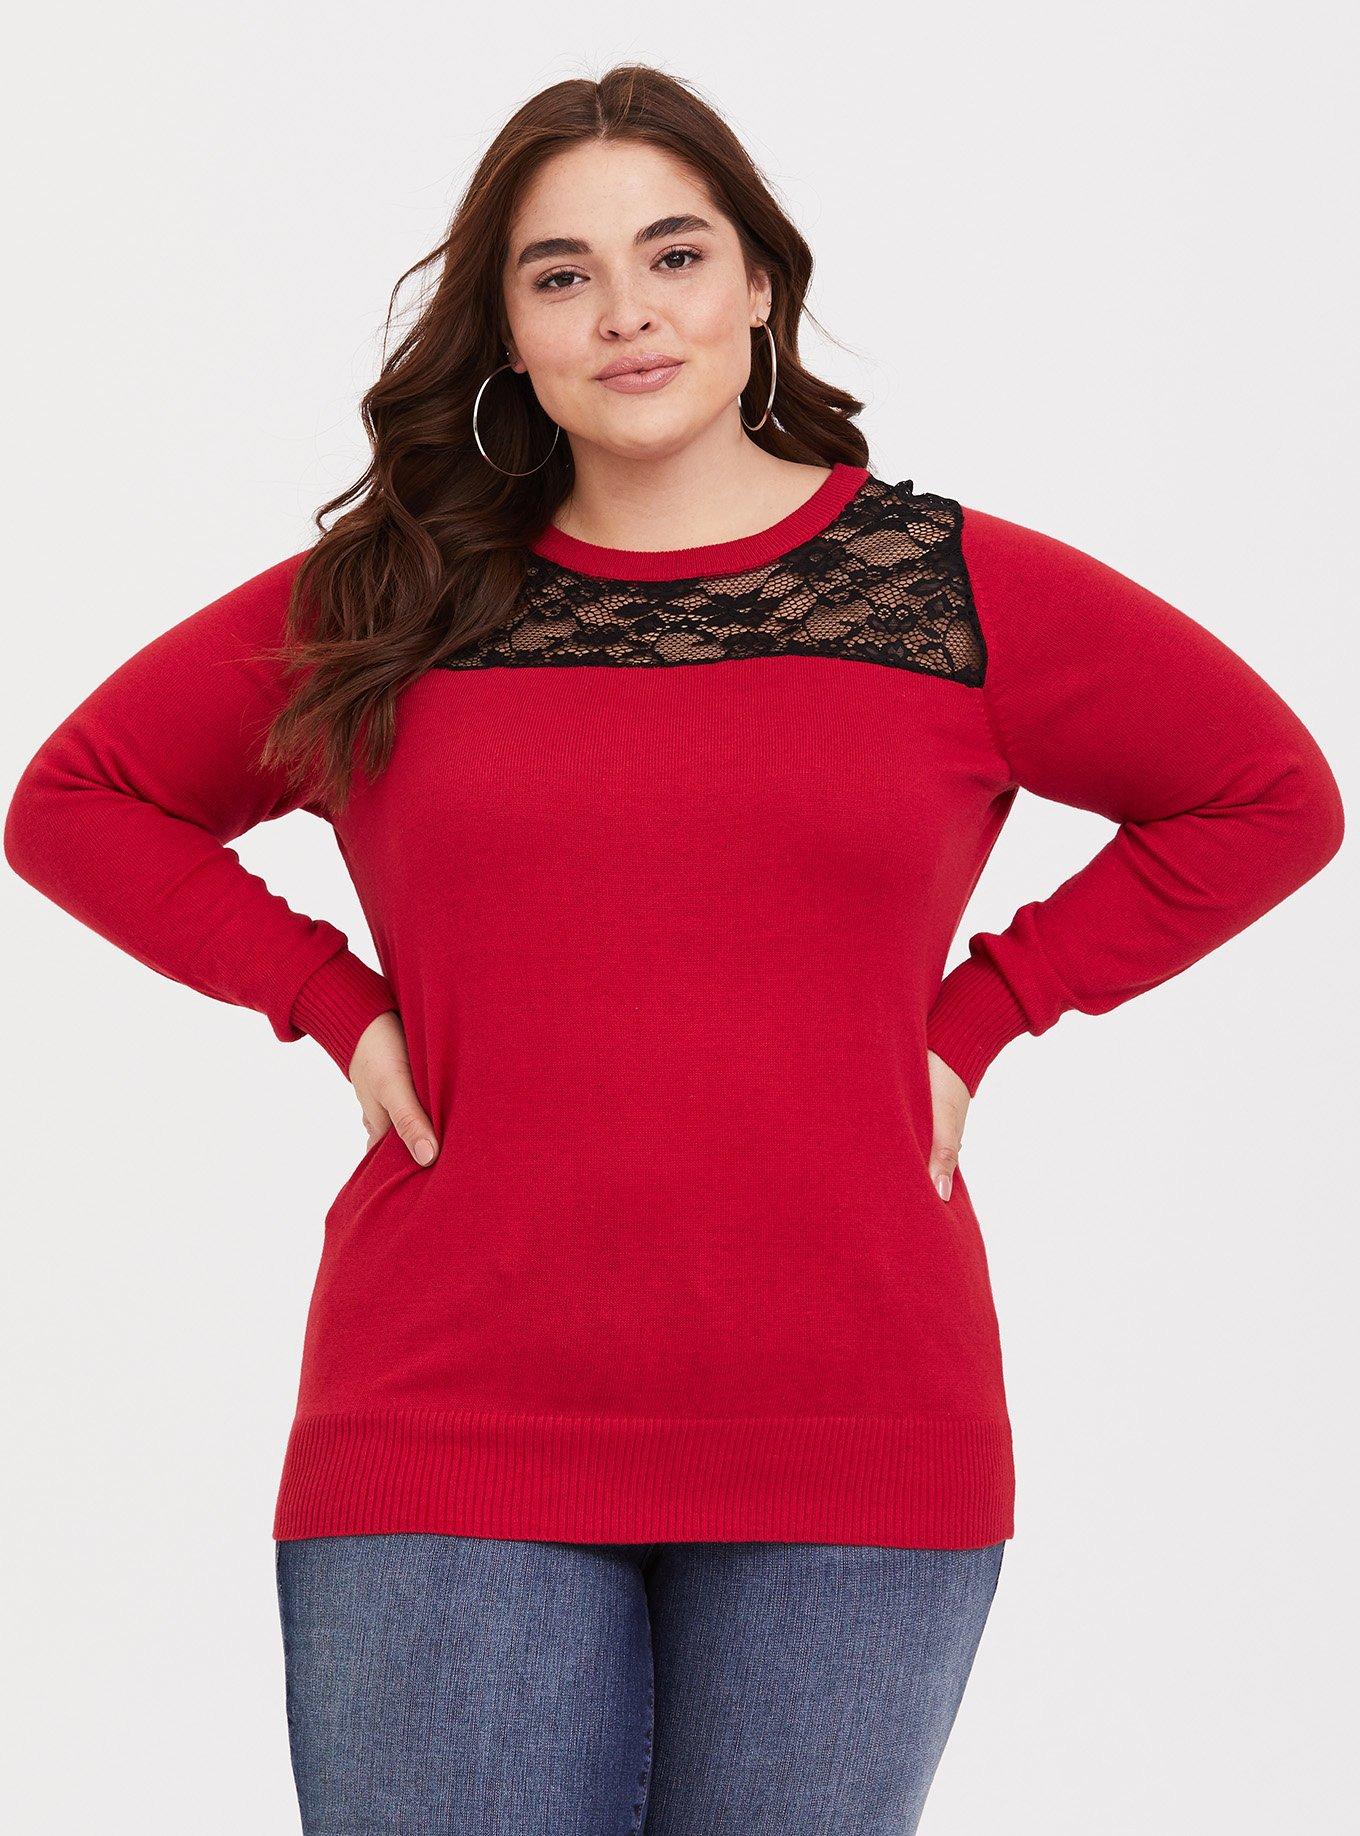 Plus Size - Red Lace Inset Pullover - Torrid